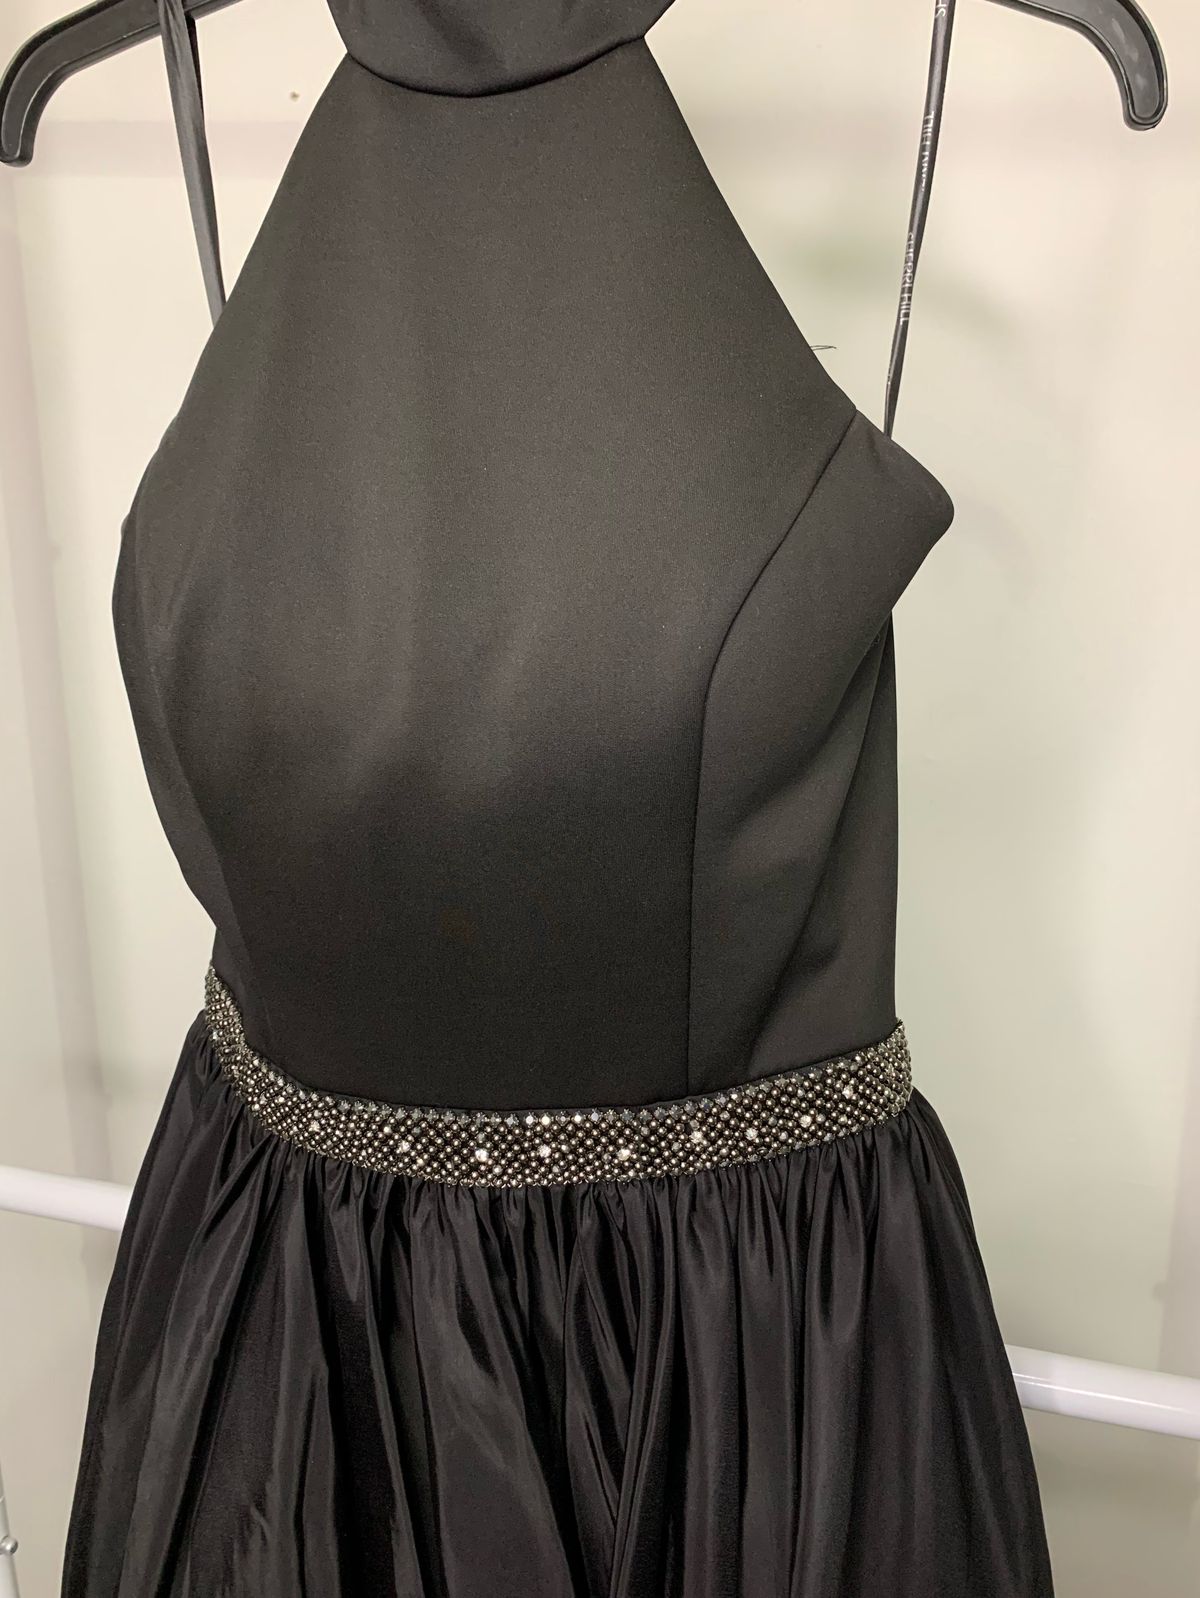 Sherri Hill Size 4 Prom High Neck Black Cocktail Dress on Queenly